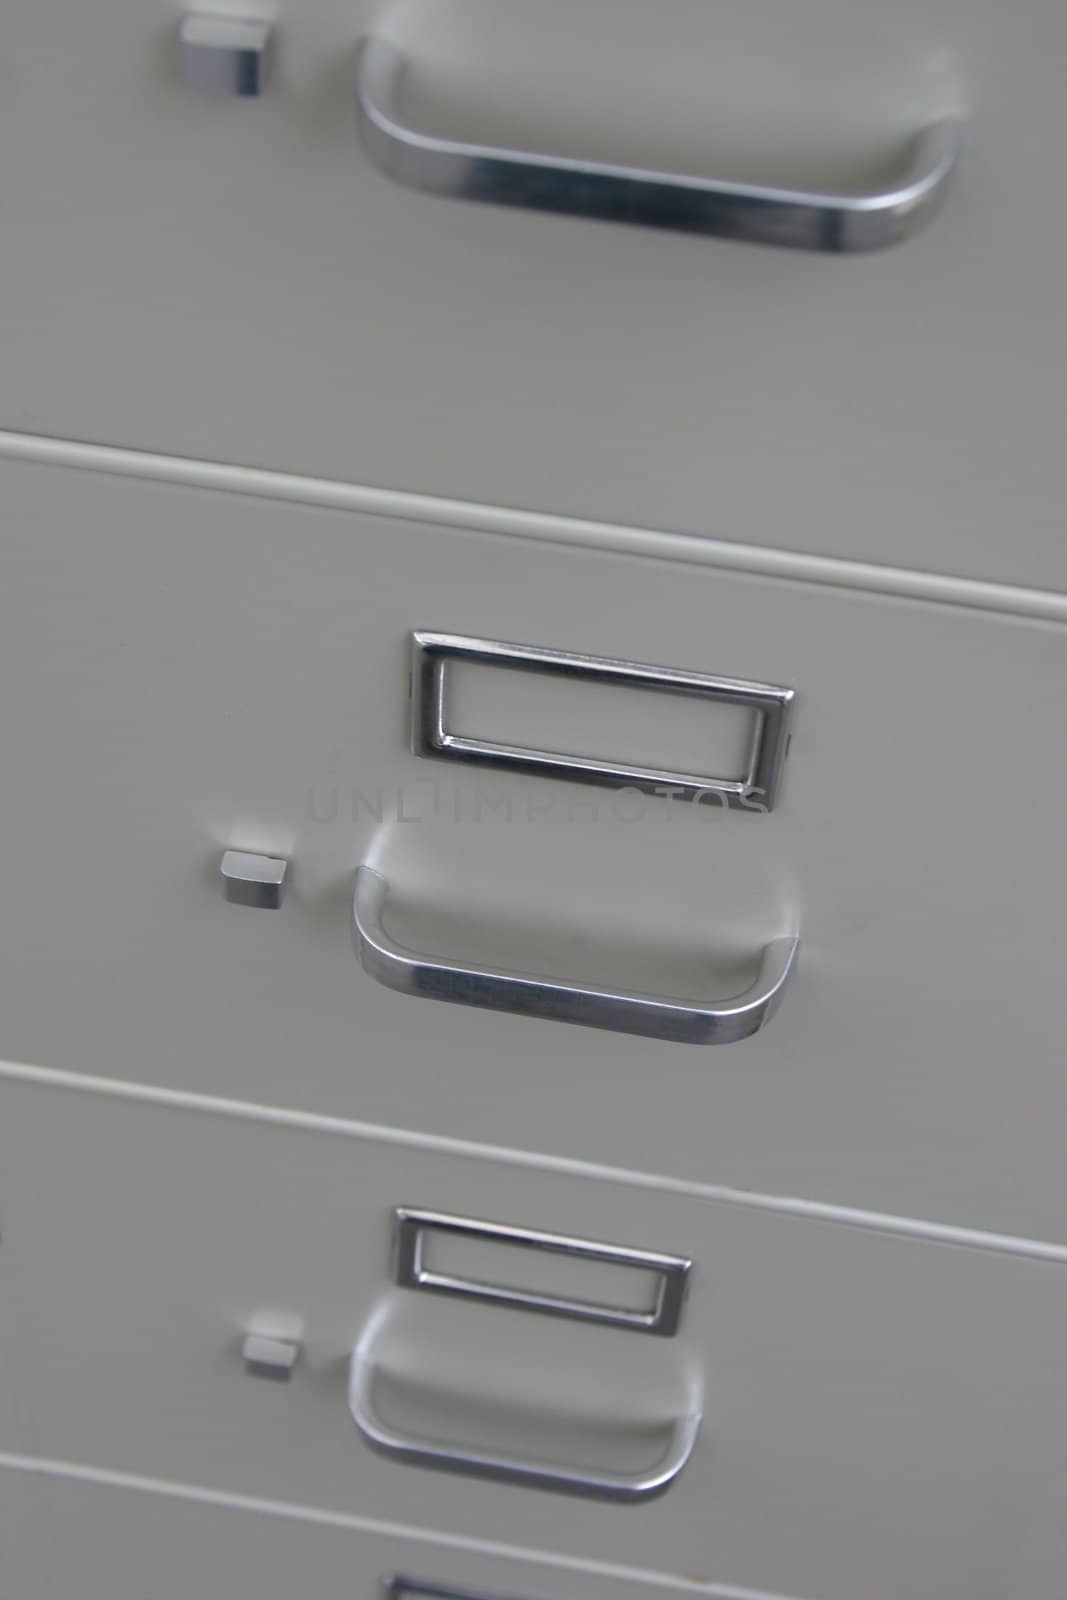 Old fashioned filing cabinet with blank label slots